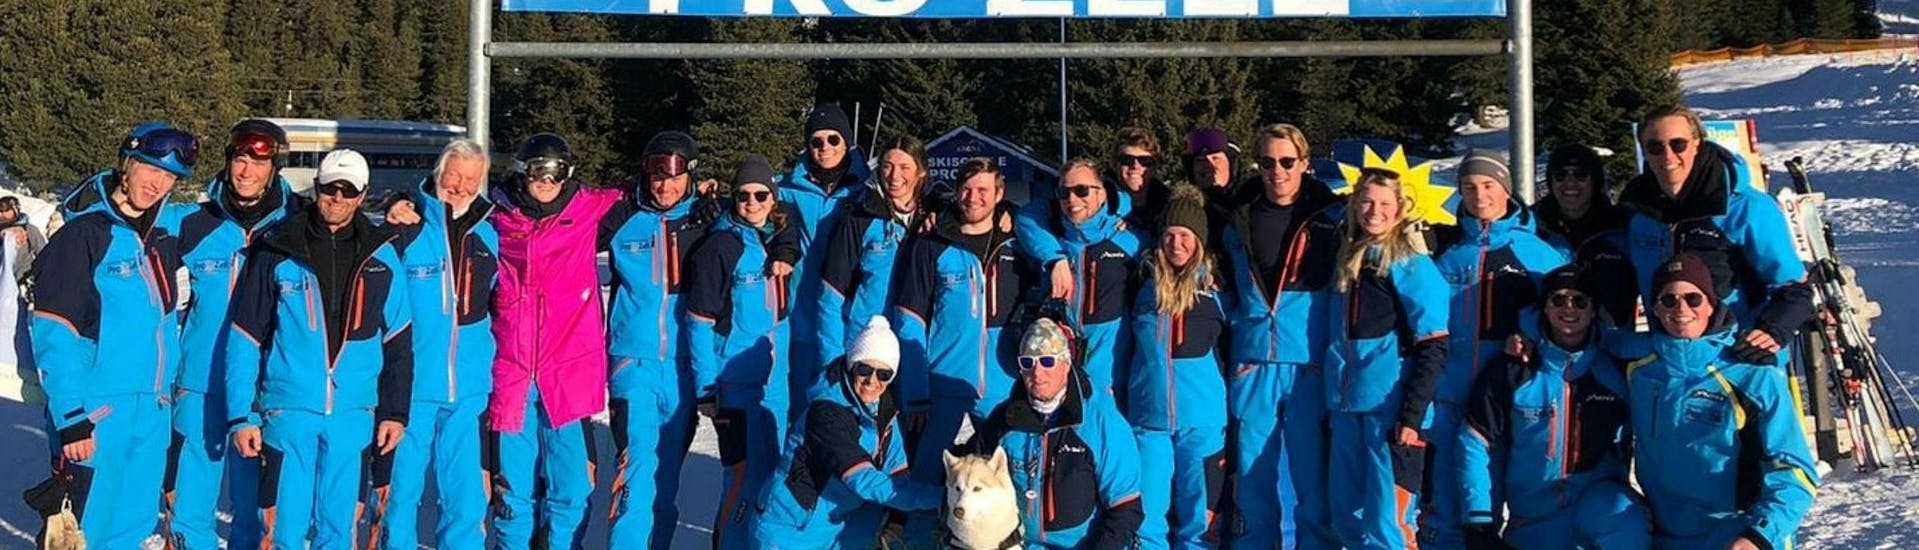 The ski instructors from the ski school Skischule Pro Zell in Zell am Ziller are posing together for a group photo to promote their Ski Lessons for Adults - Beginners.